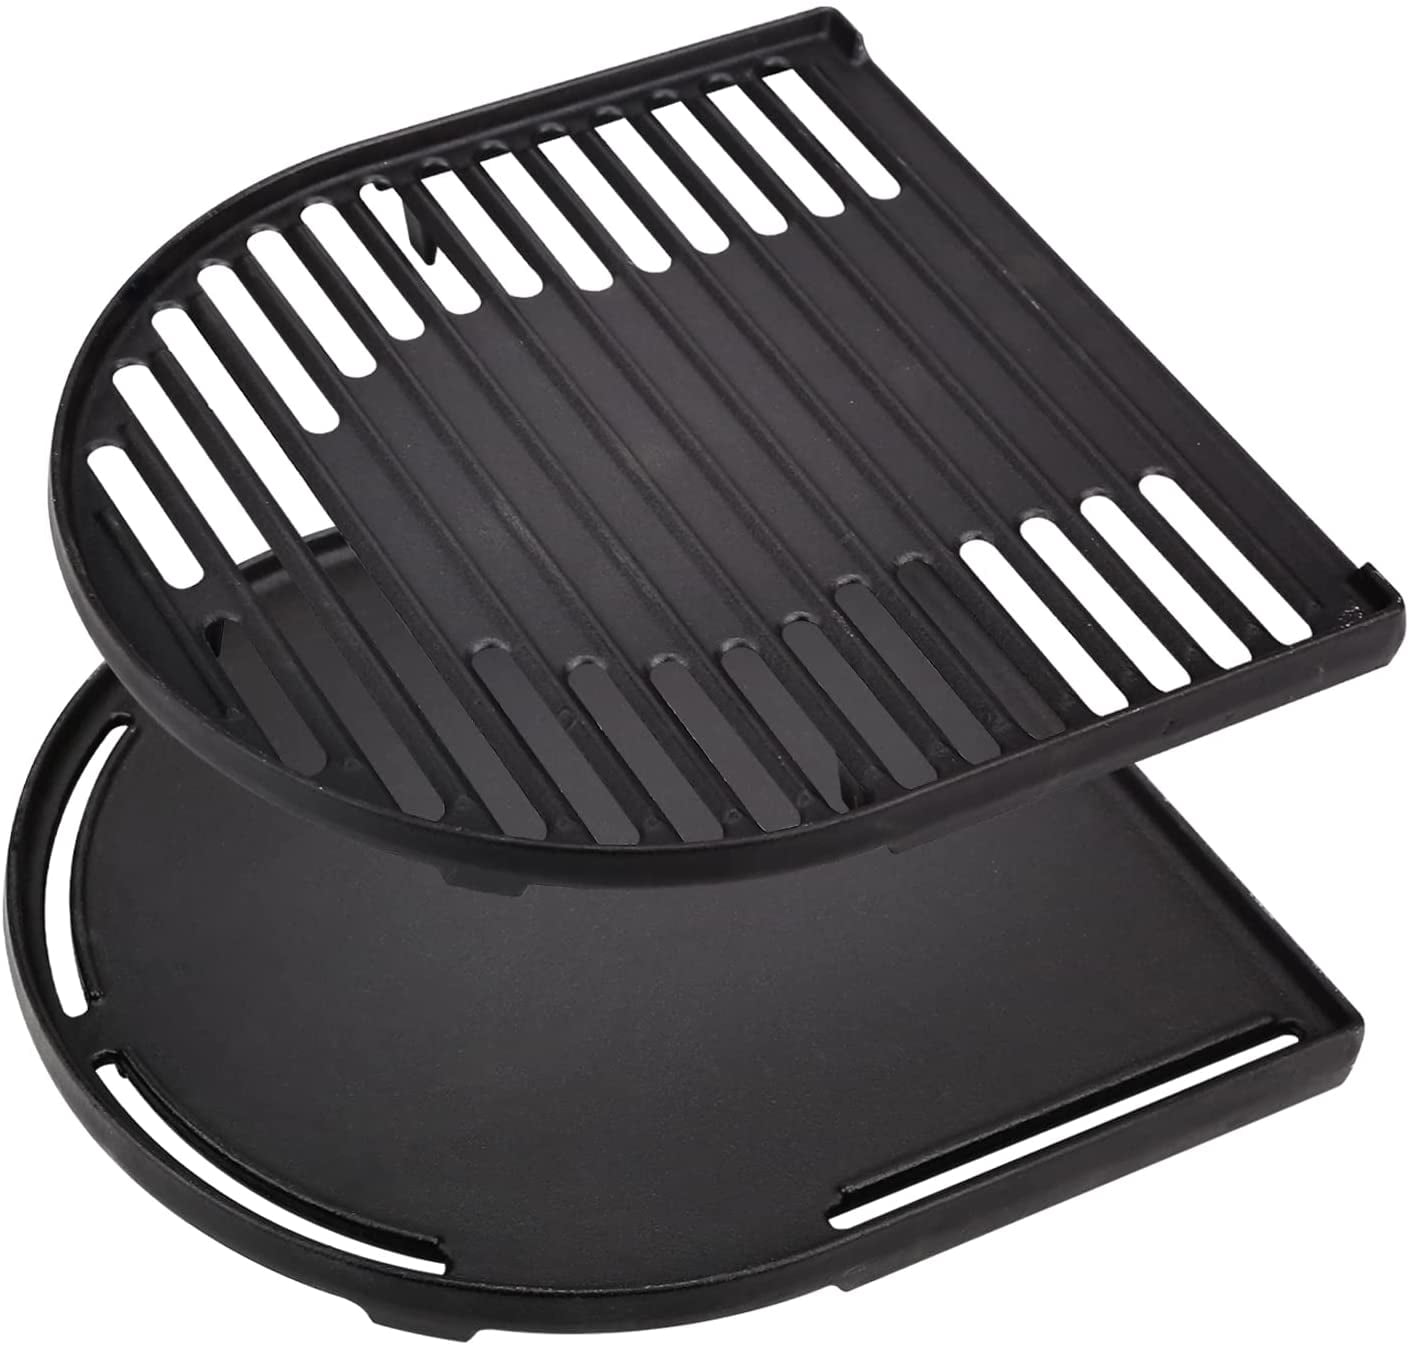 Grisun Cast Iron Grill Parts with Cooking Griddle and Grill Grates for  Coleman Roadtrip Swaptop Grills LX LXE LXX, Non-Stick Flat Grill Accessories  for Coleman Grill, 2Pcs 